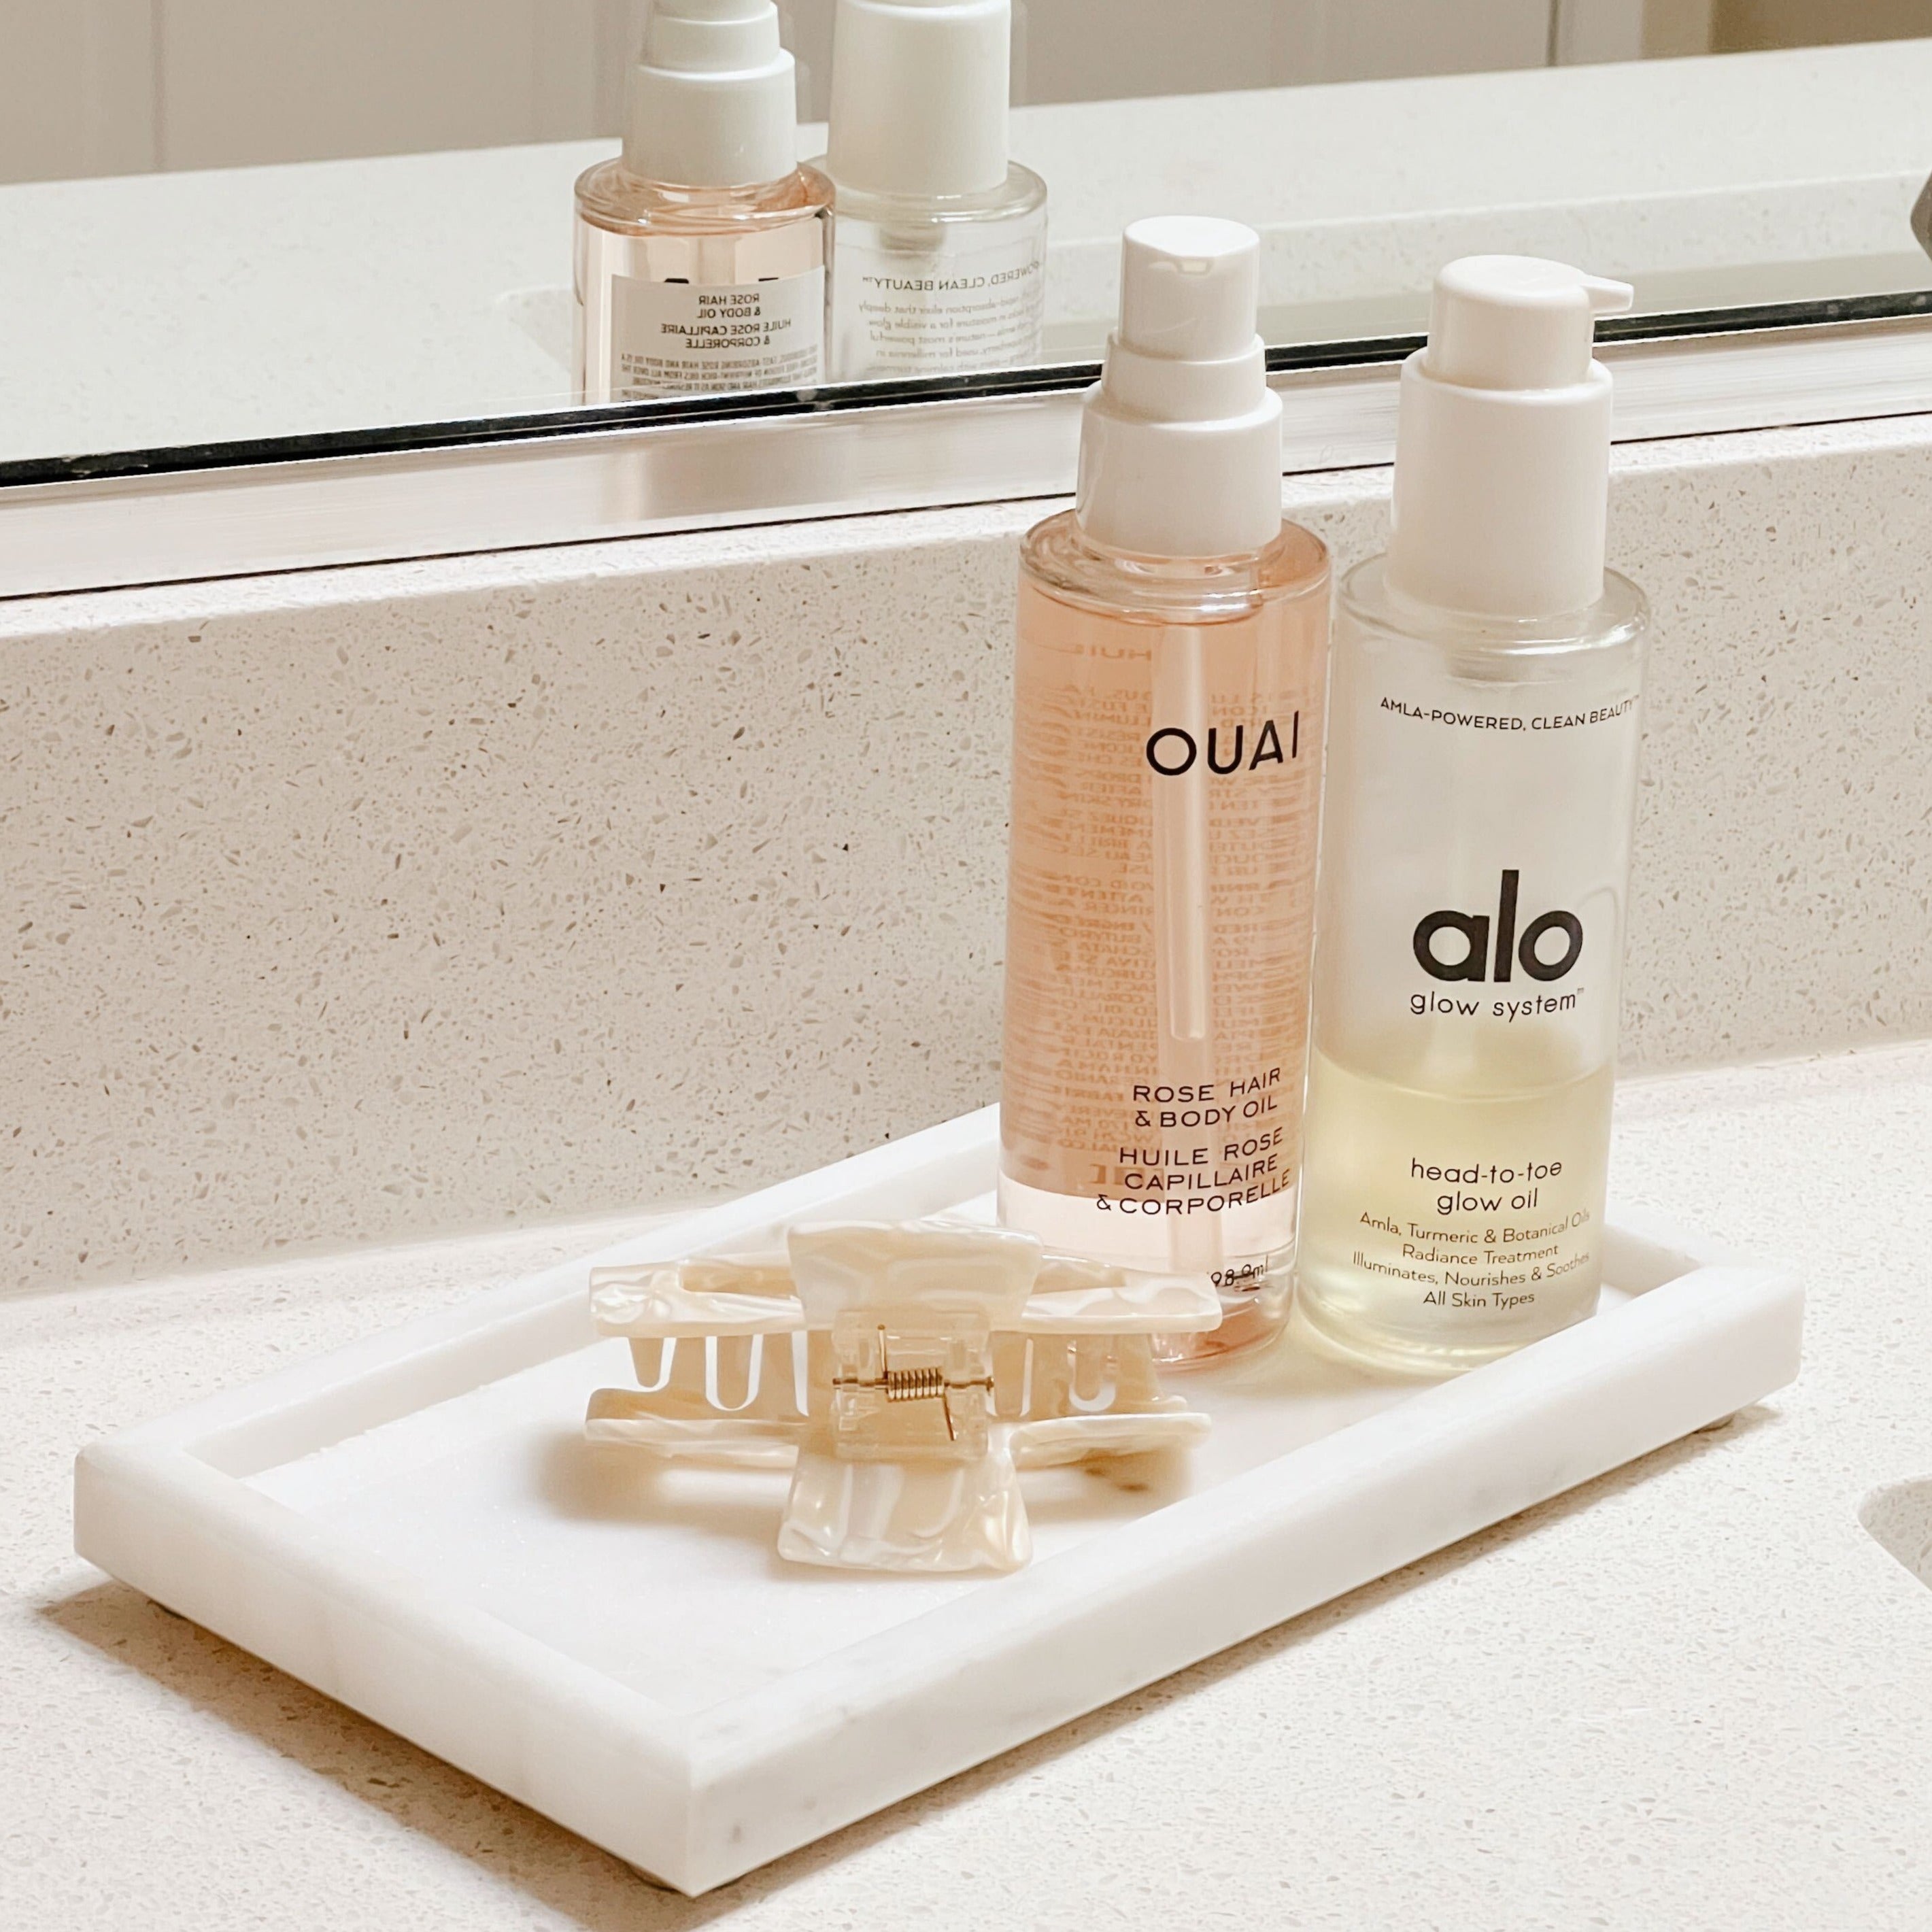 A white marble tray sitting on a white bathroom counter holding a white marble hair clip, Ouai rose hair & body oil, and alo head-to-toe glow oil.